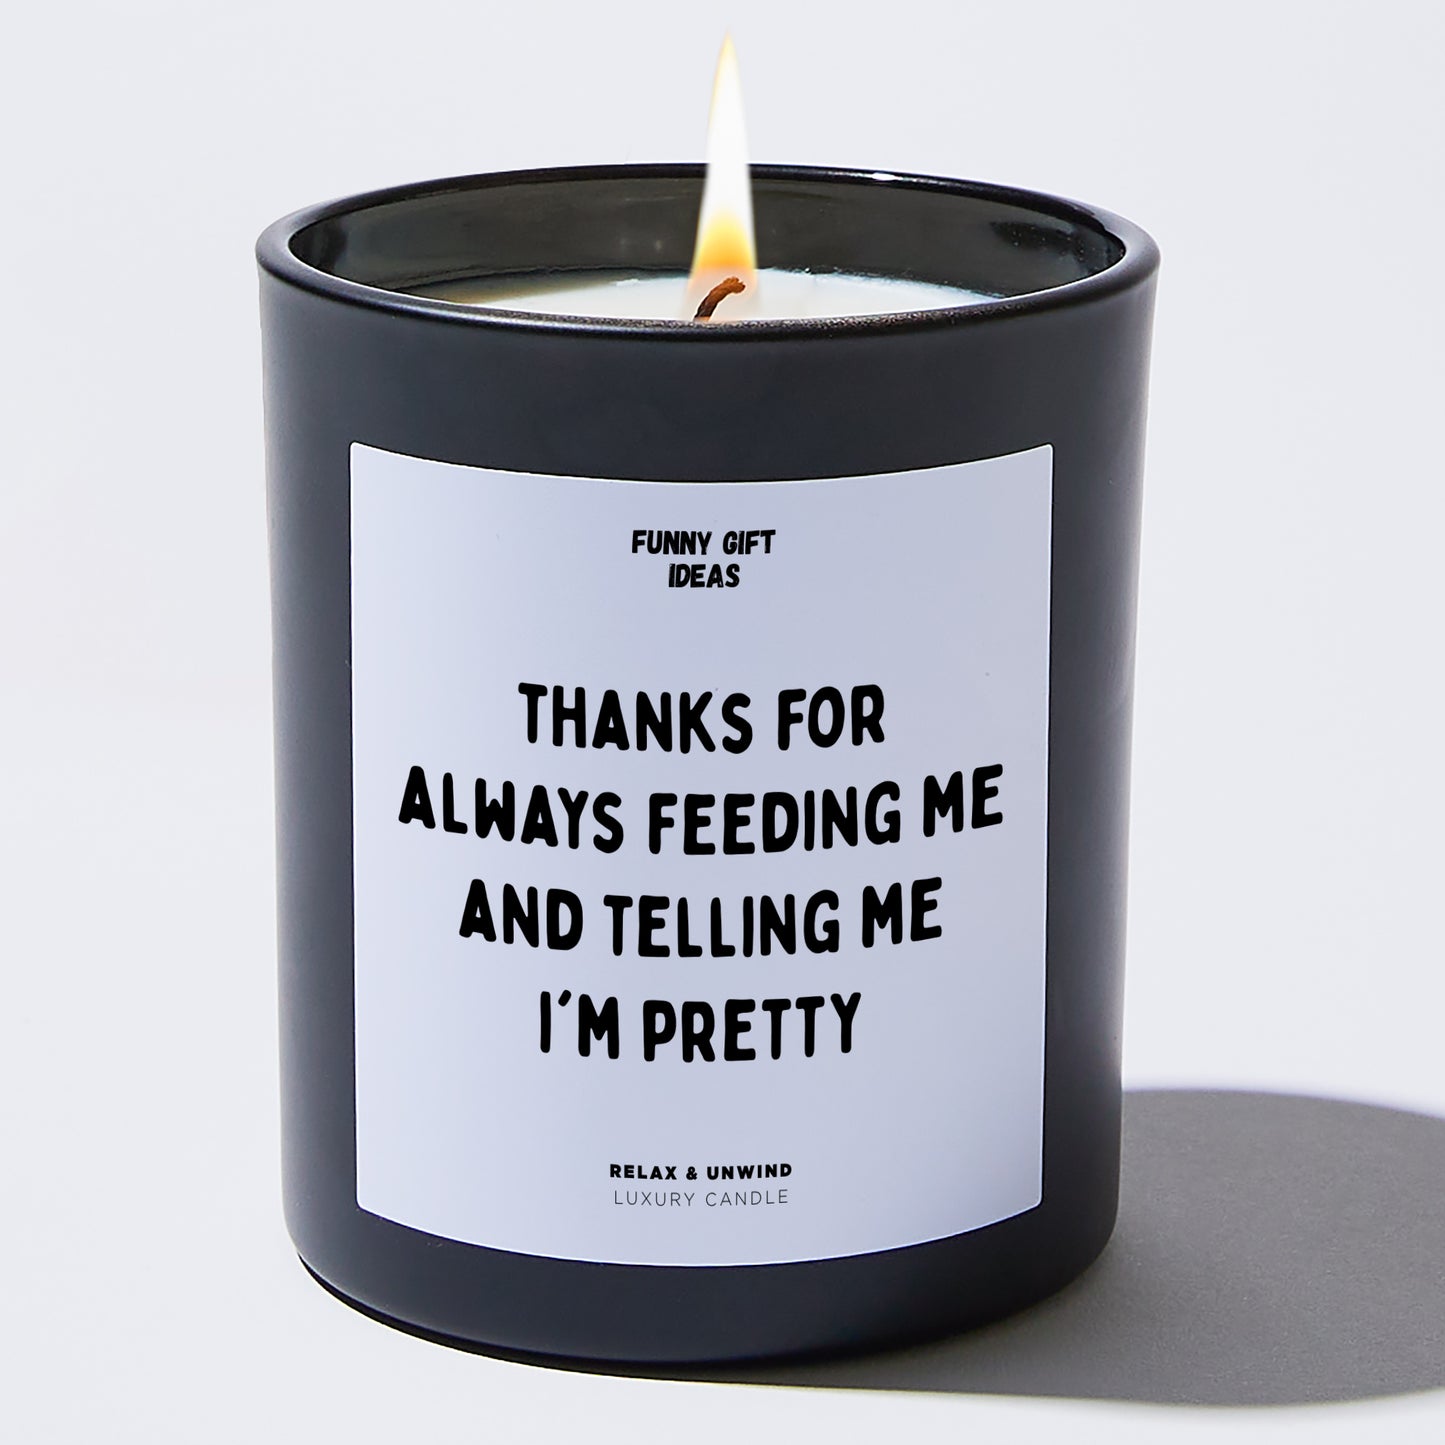 Anniversary Thanks for Always Feeding Me and Telling Me I'm Pretty - Funny Gift Ideas